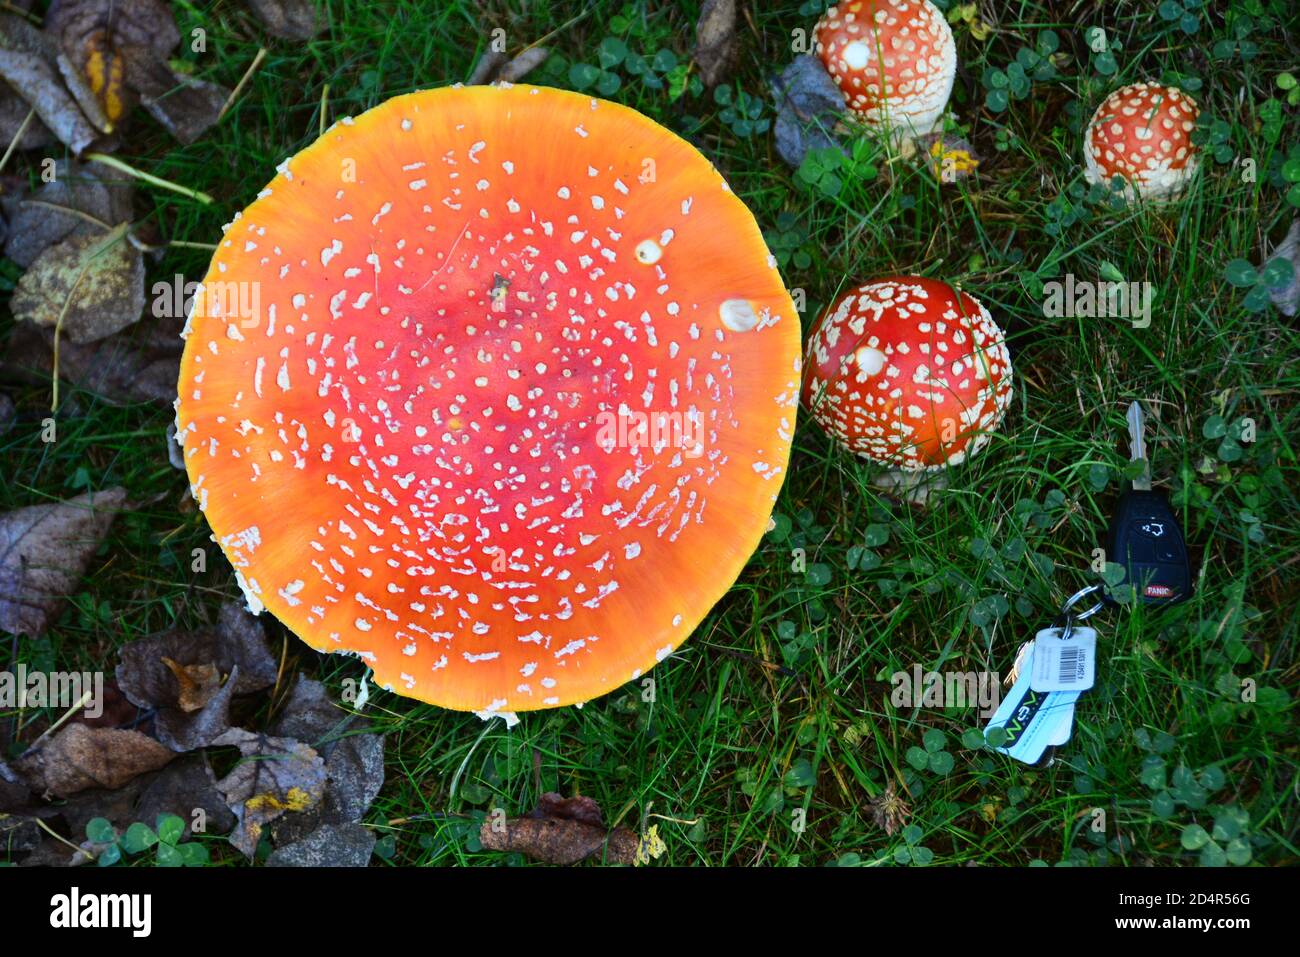 Amanita Mushroom (Amanitaceae). One of the world's most toxic fungi. Responsible for over half of all cases of mushroom poisoning. 6 inches diameter. Stock Photo